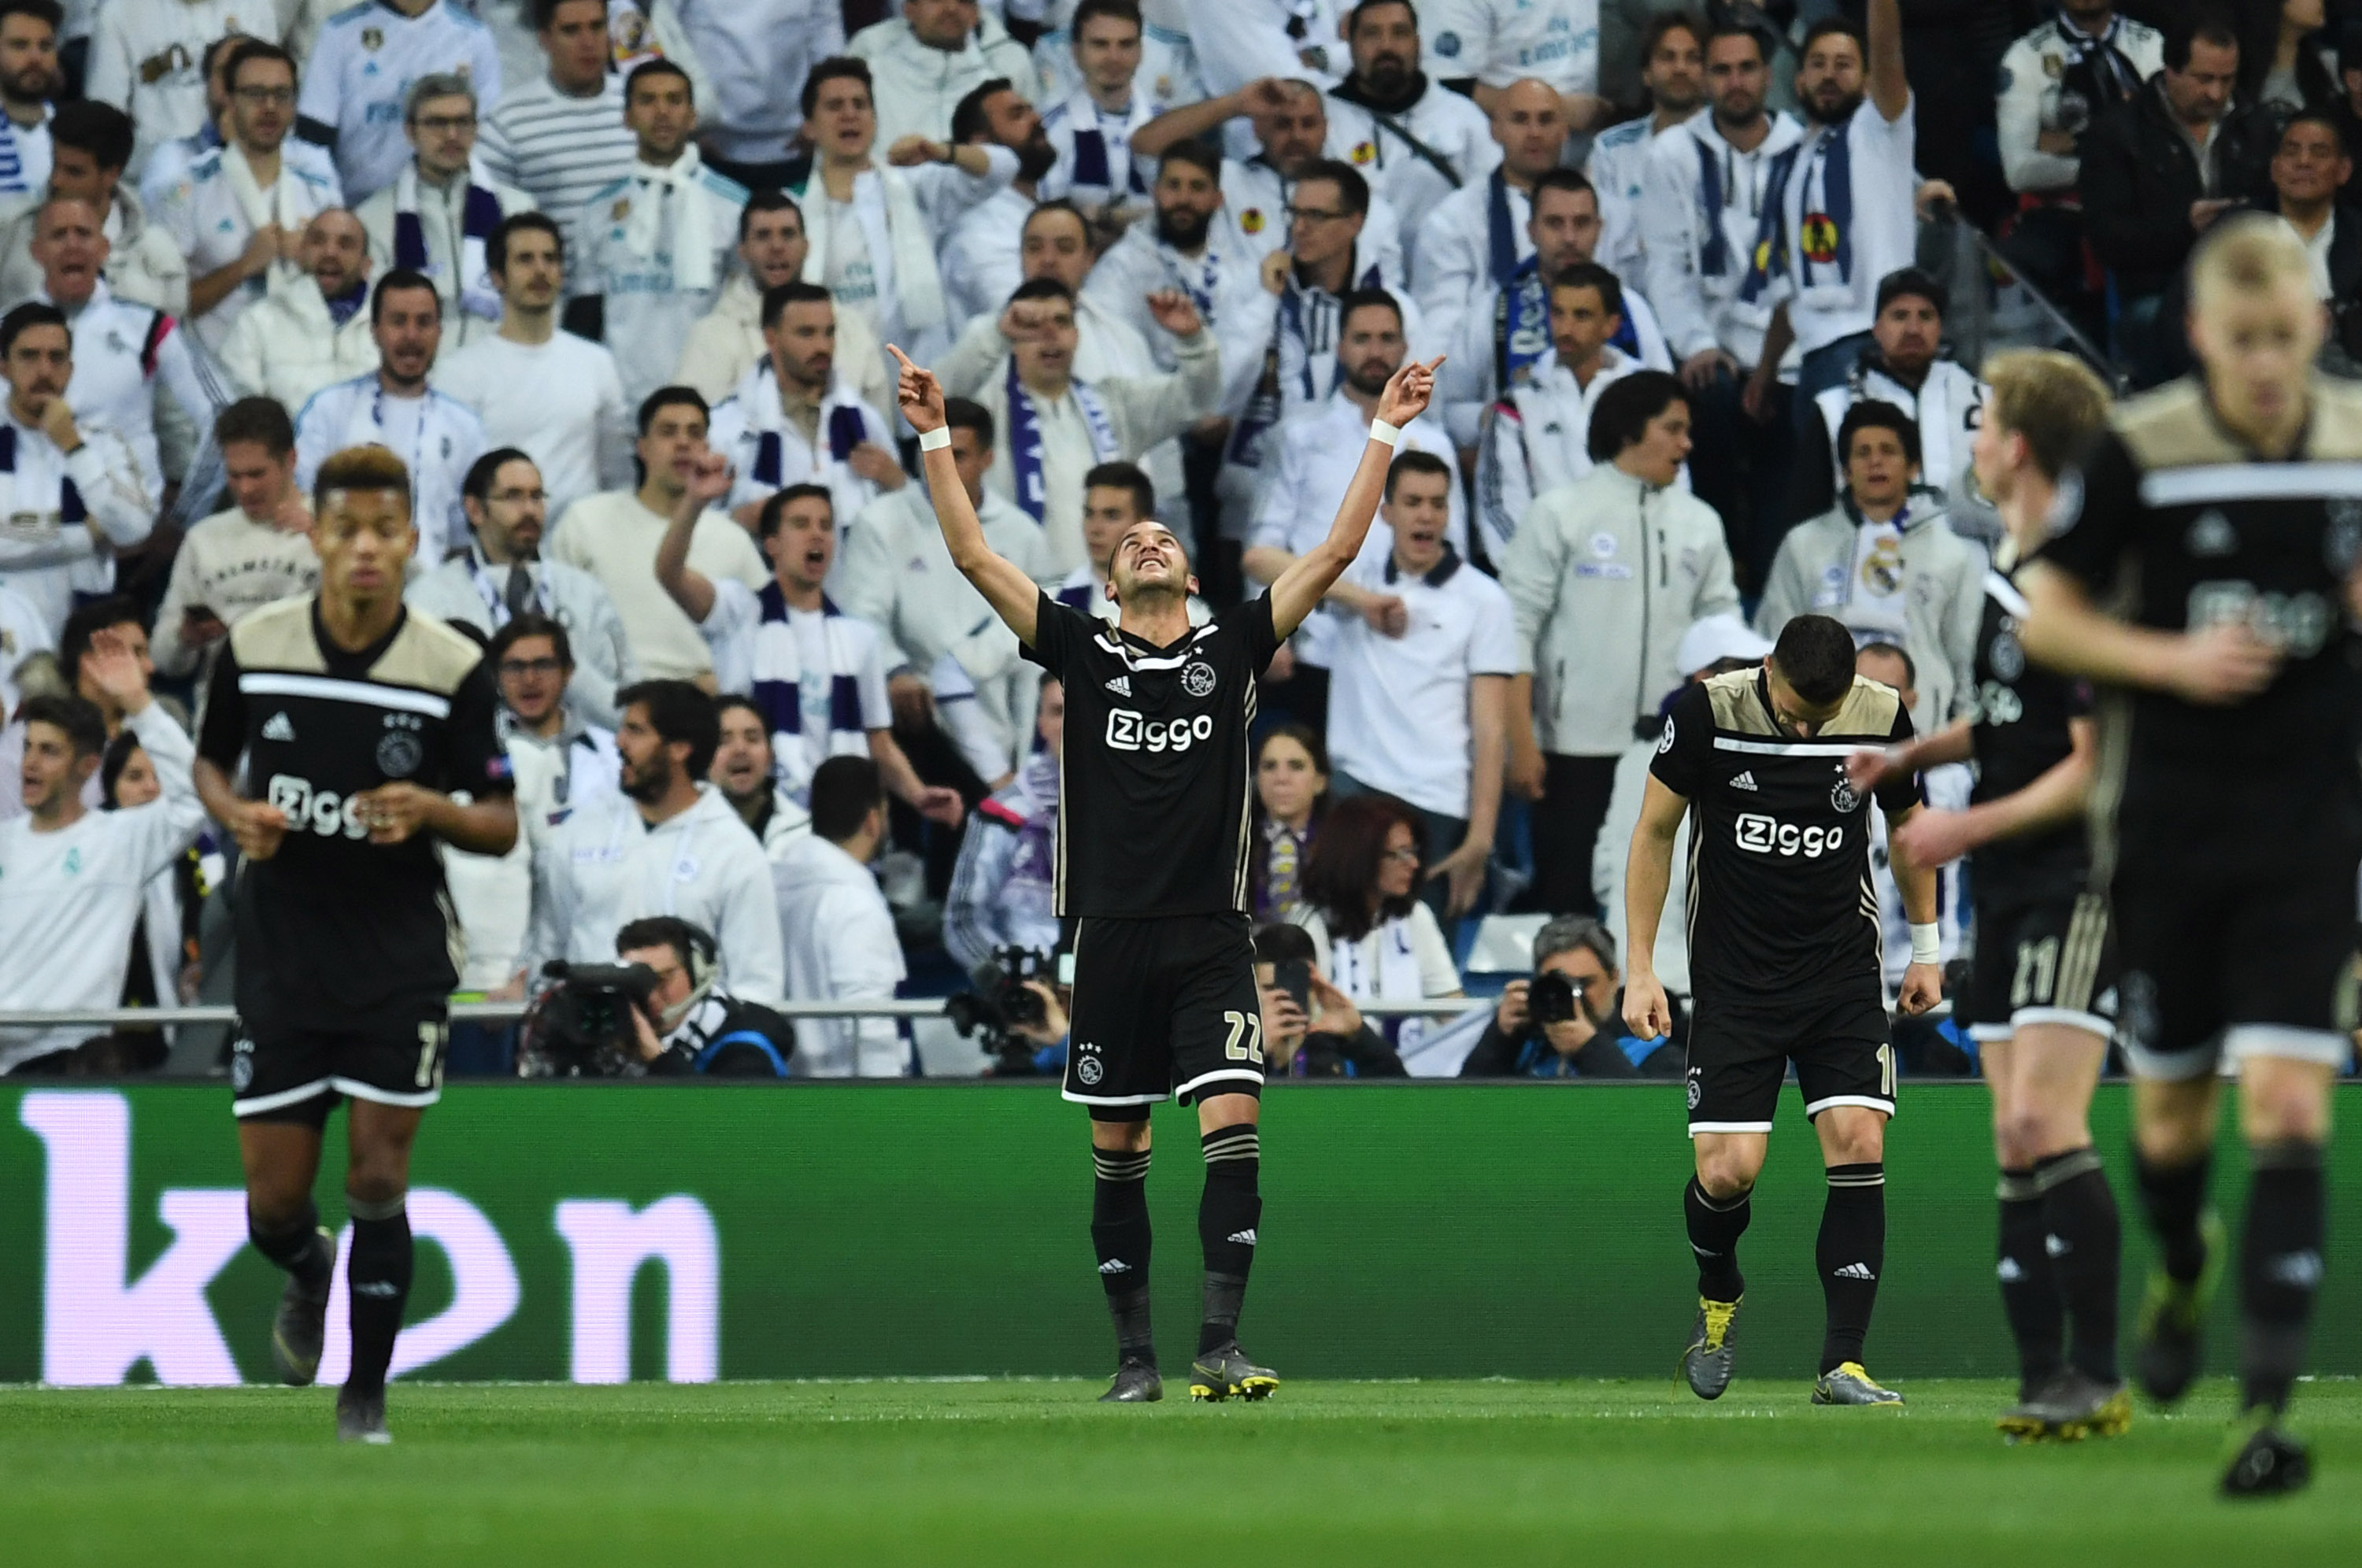 MADRID, SPAIN - MARCH 05:  Hakim Ziyech of Ajax (22) celebrates after scoring his team's first goal with team mates during the UEFA Champions League Round of 16 Second Leg match between Real Madrid and Ajax at Bernabeu on March 05, 2019 in Madrid, Spain. (Photo by David Ramos/Getty Images)